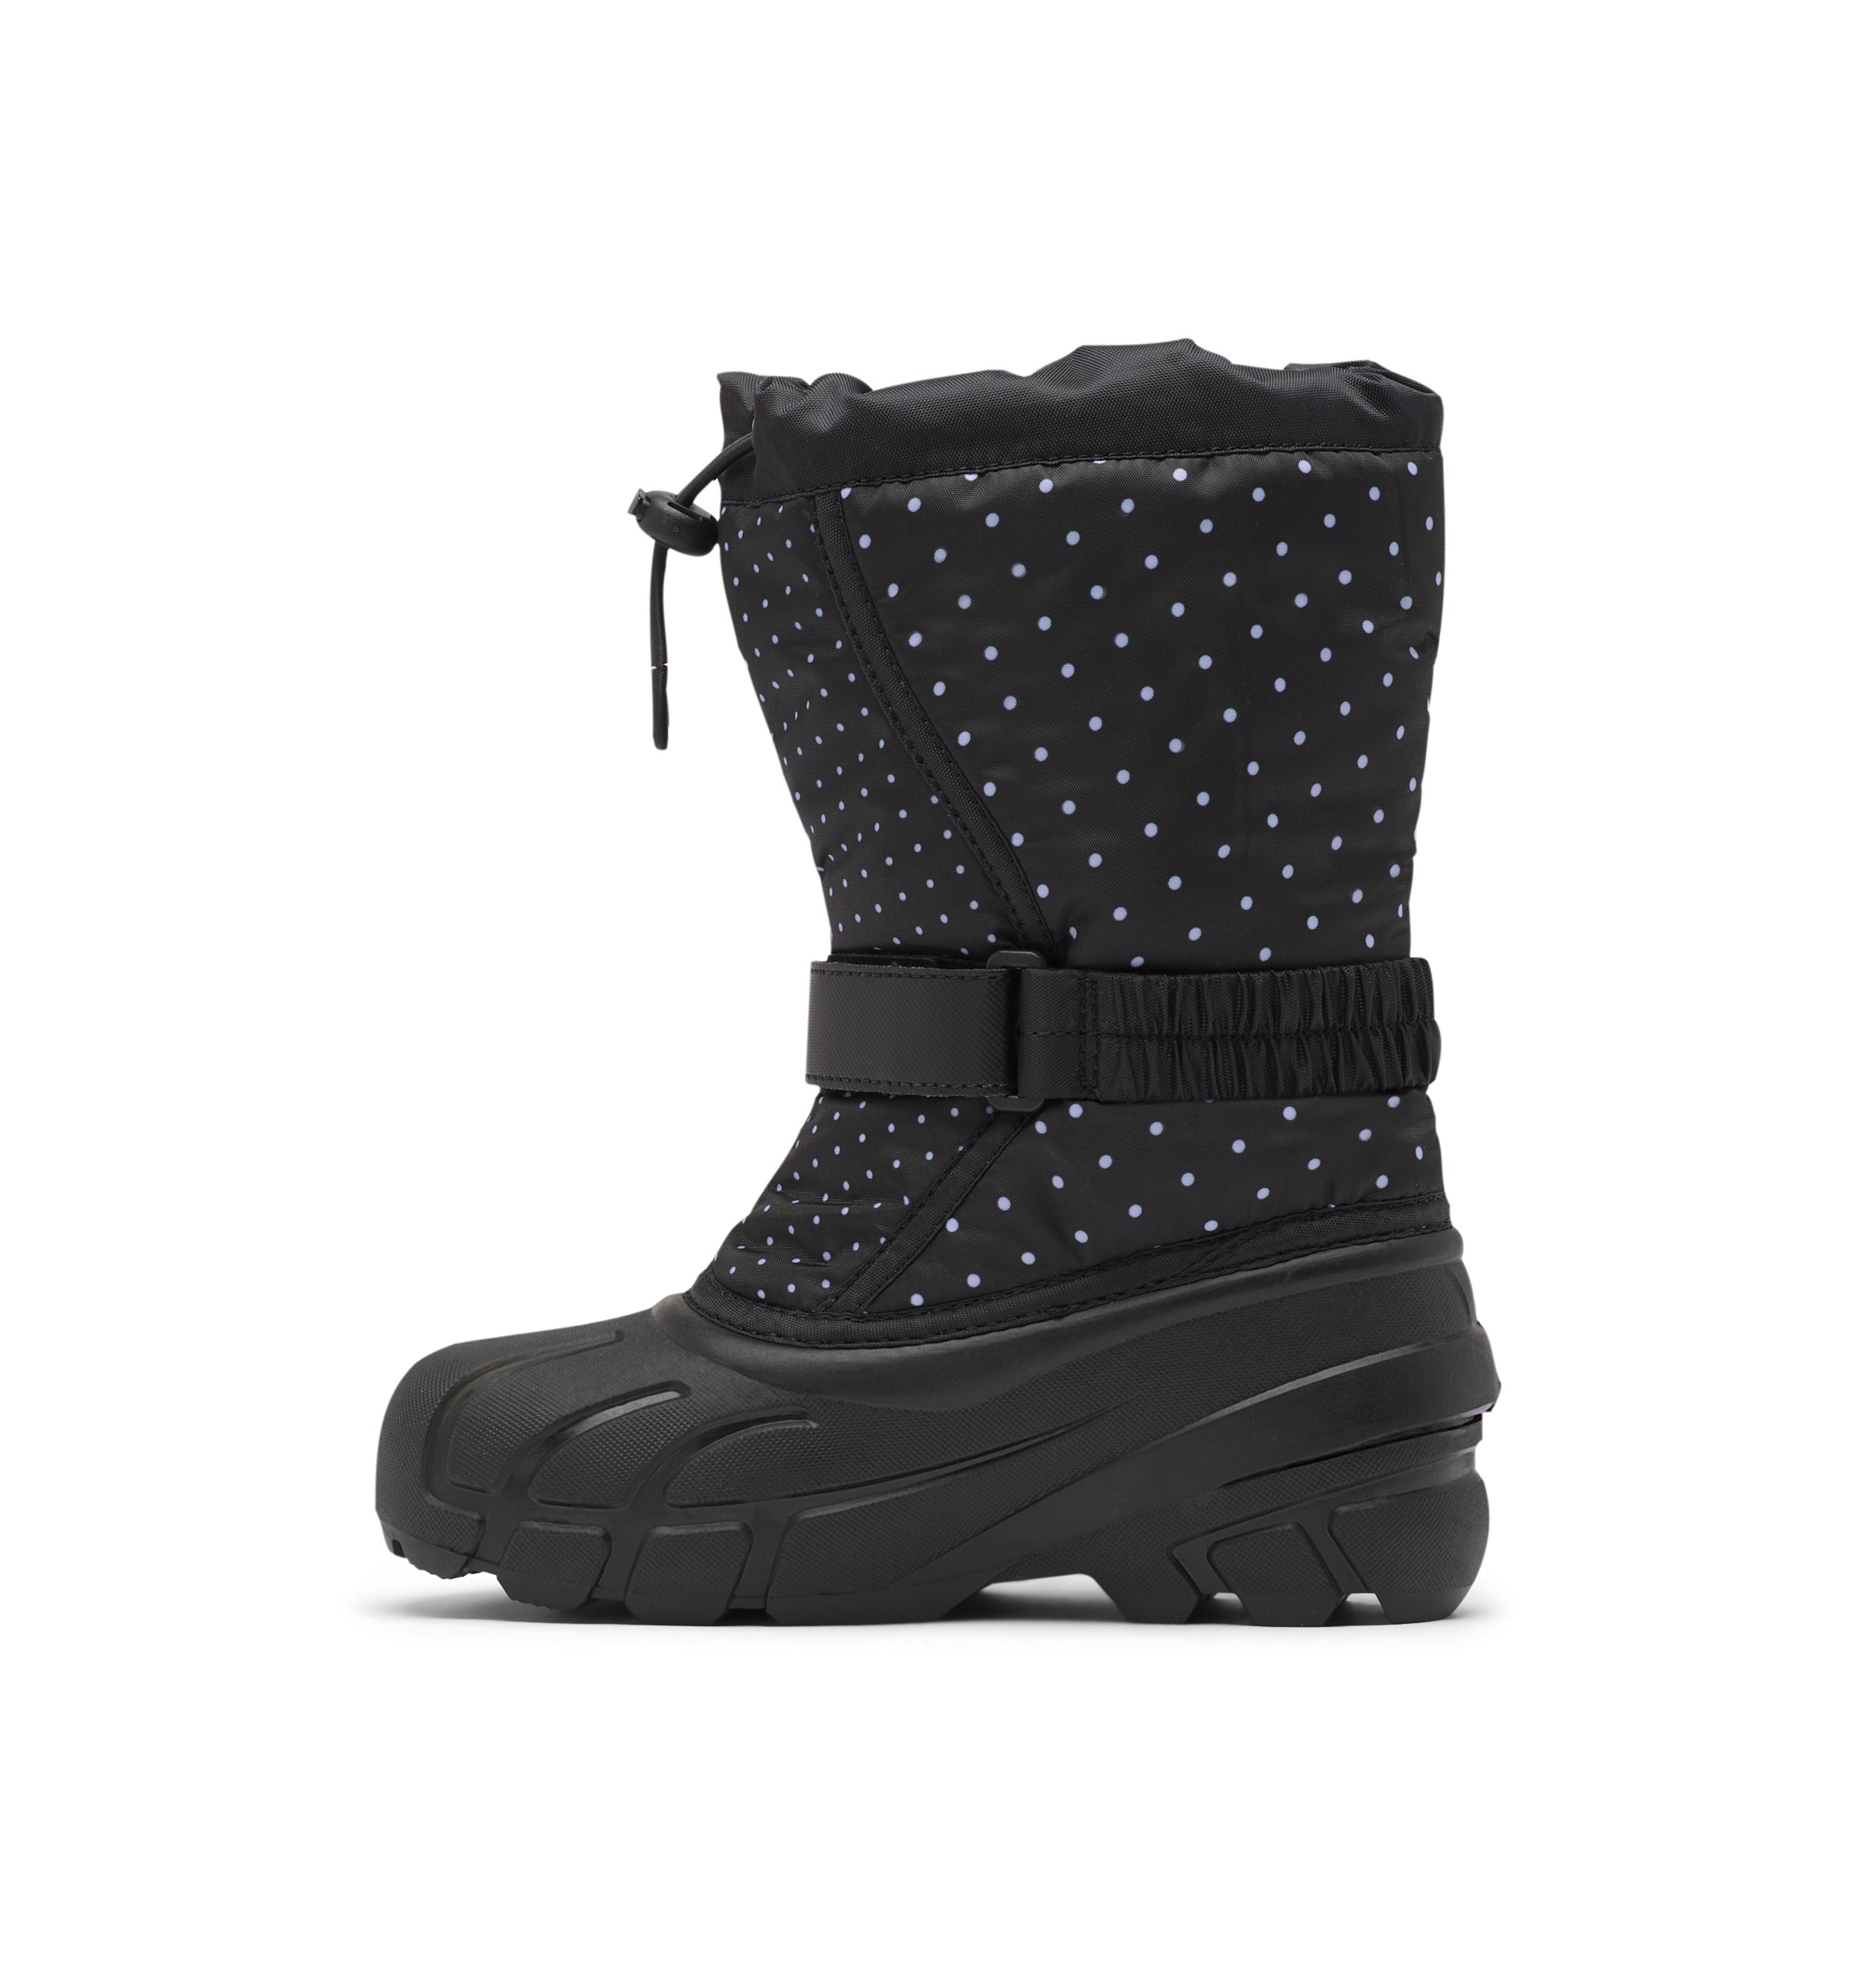 Flurry Printed Kid's Insulated Snow Boot - Black/Dots